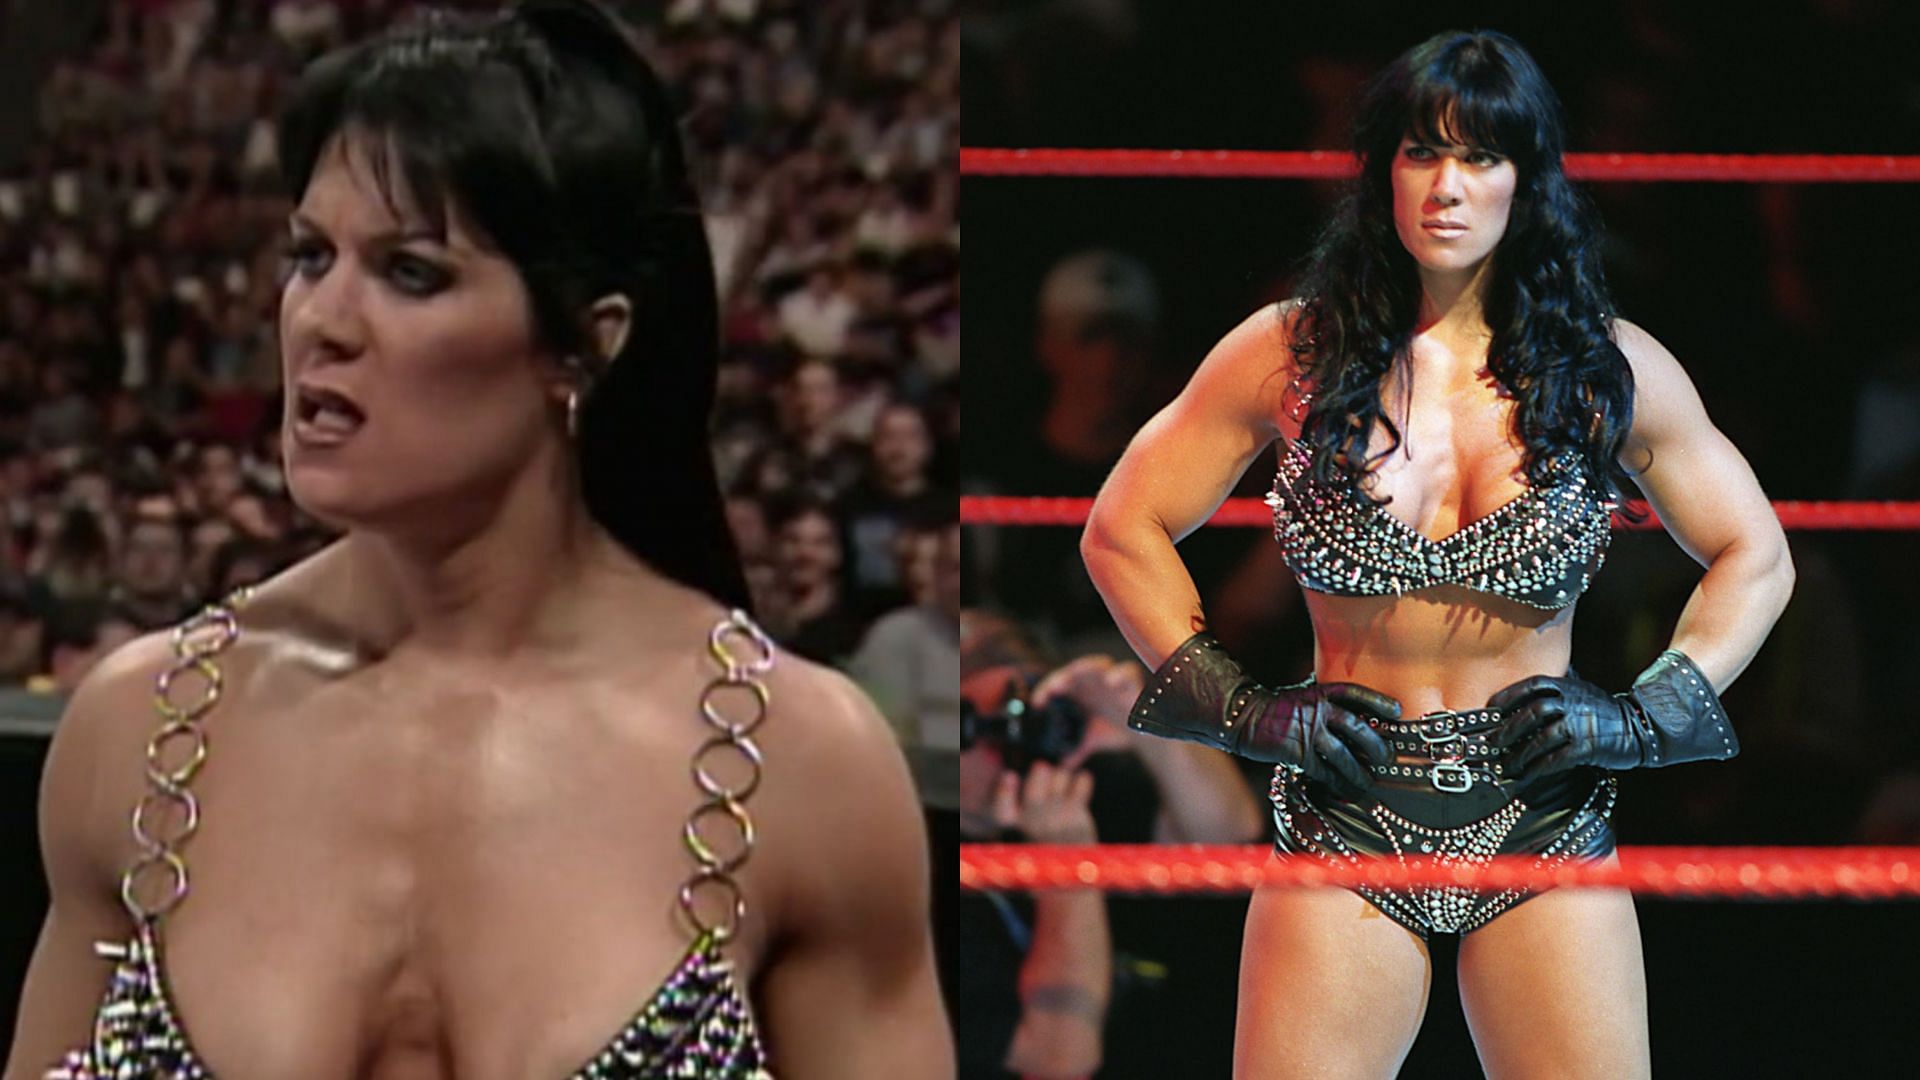 Chyna claimed that Trish Stratus had no ability when WWE hired her